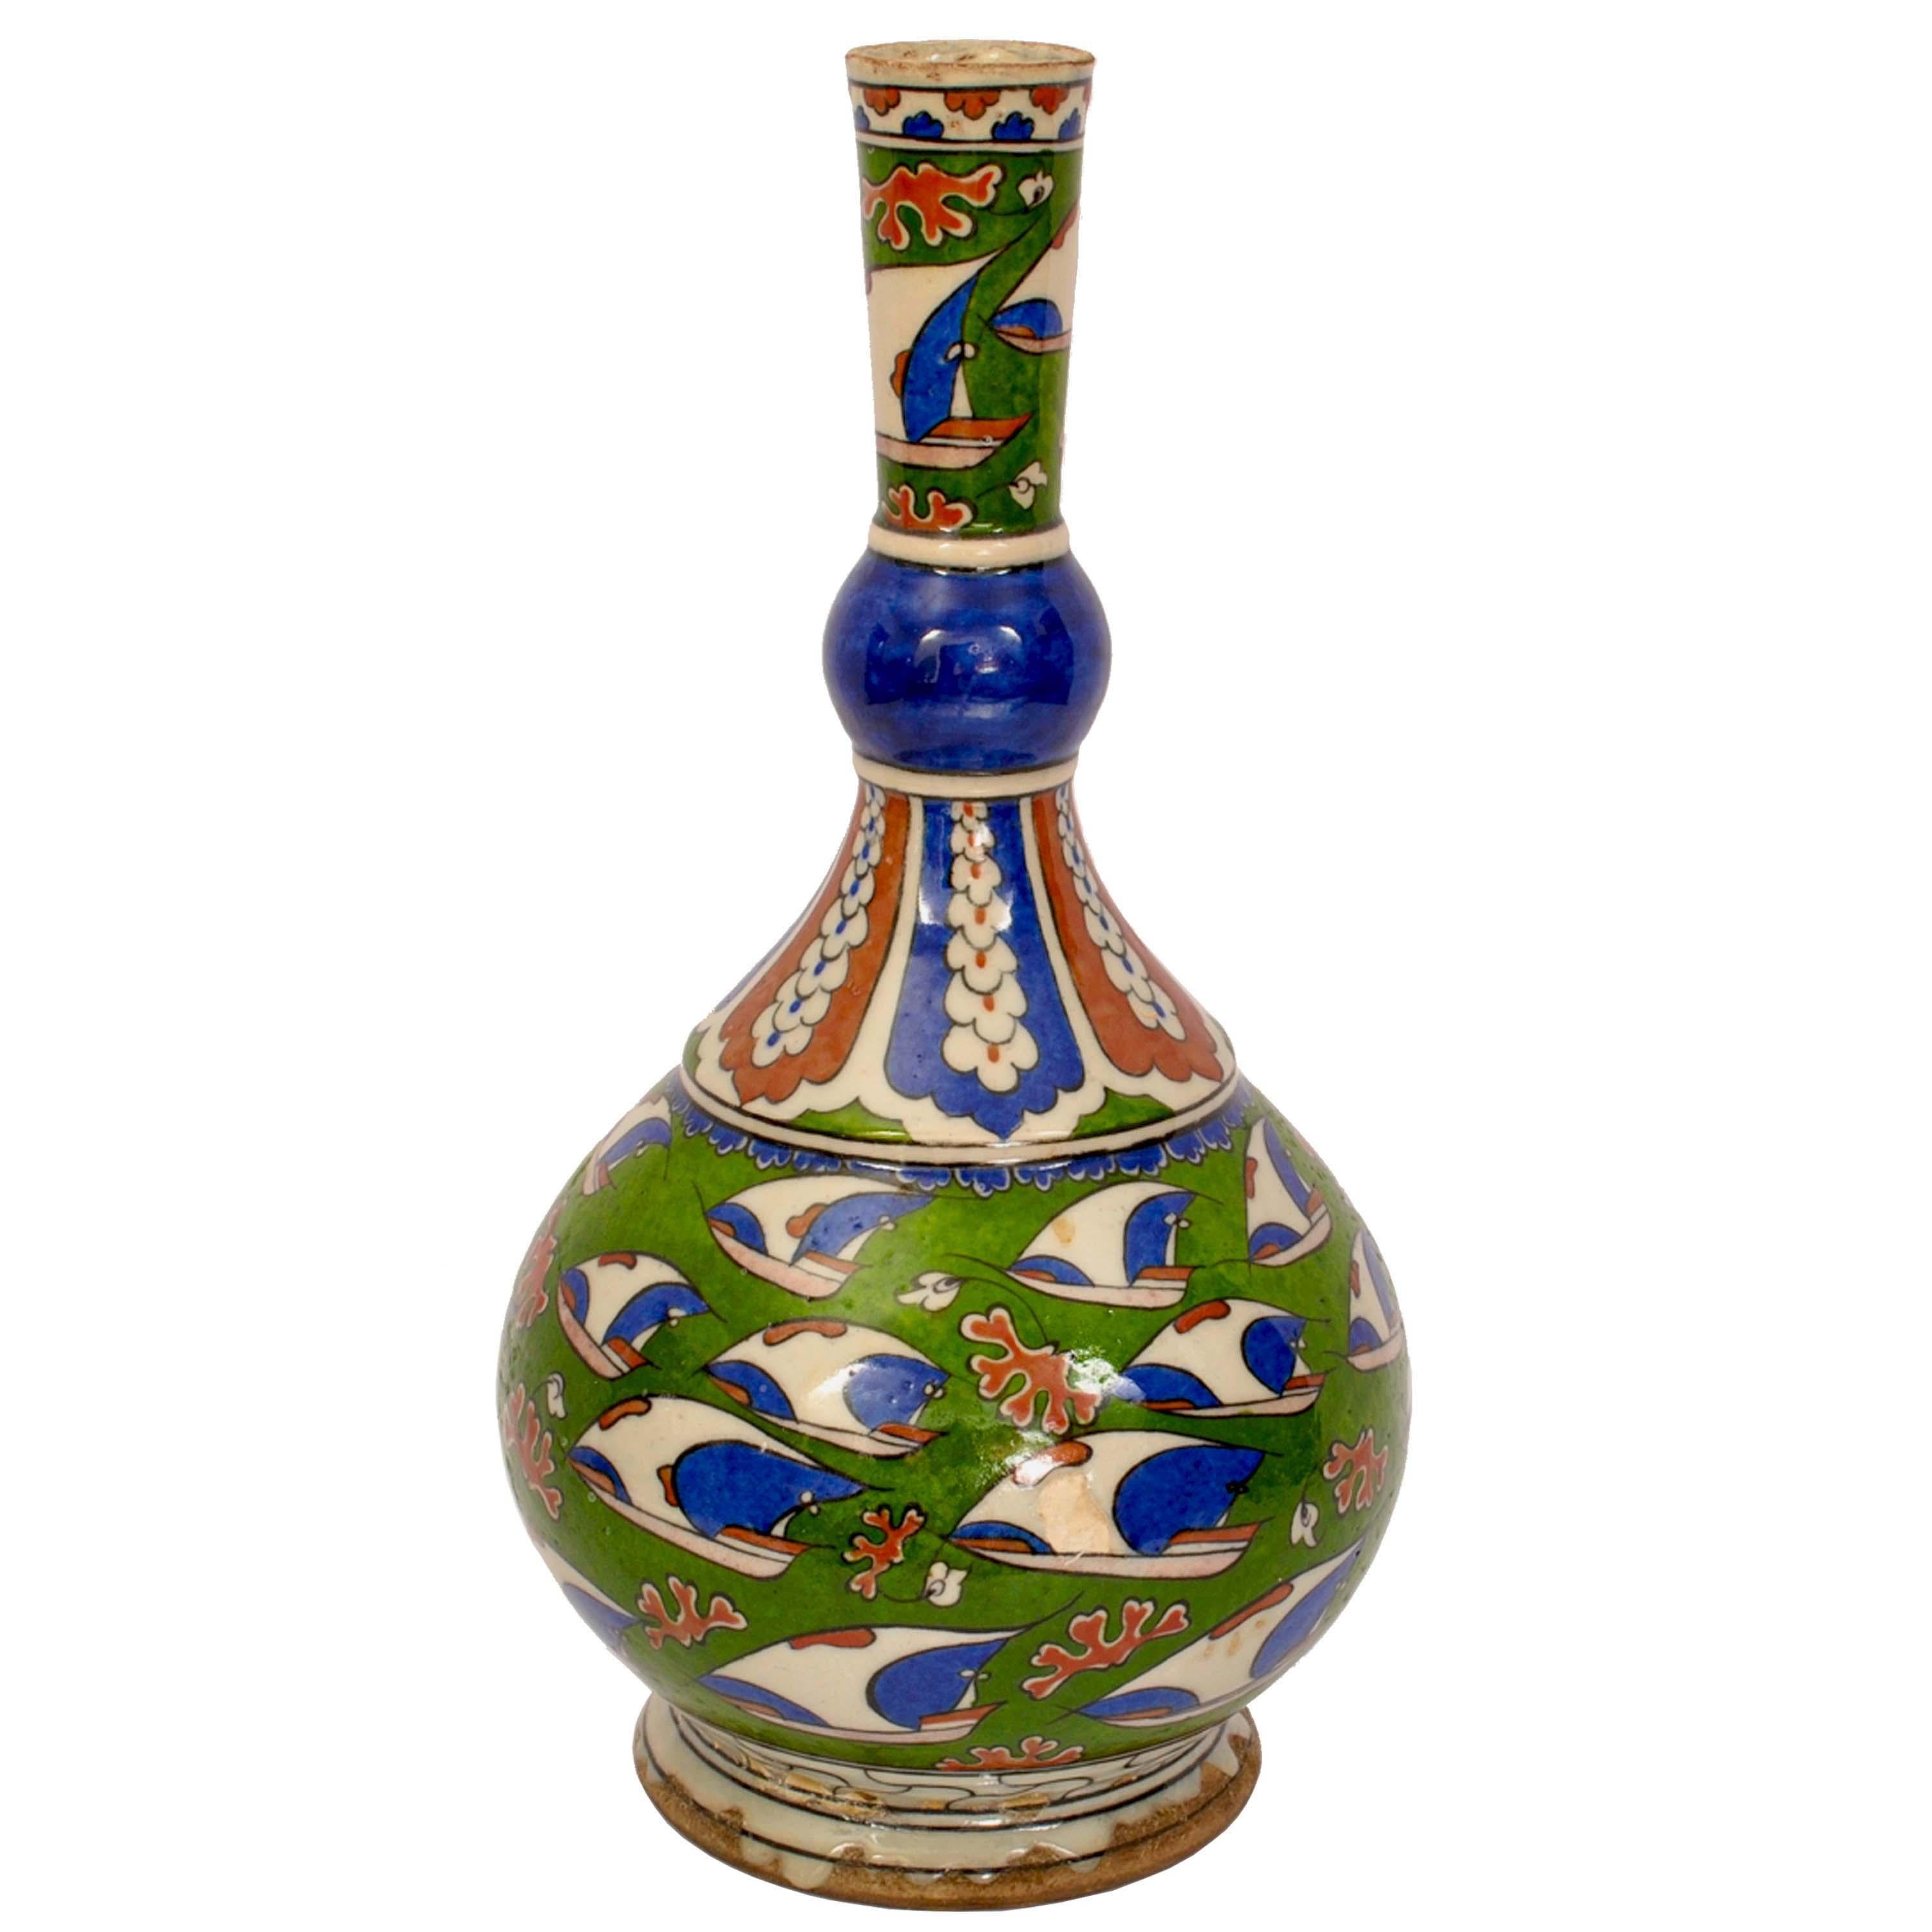 A very good & large example of an antique Iznik style pottery bottle vase by the Samson factory, Paris, Circa 1880.
Edme Samson had created beautiful pottery in the Persian, Islamic, Iznik and Hispano Moresque styles in the late 19th century. This